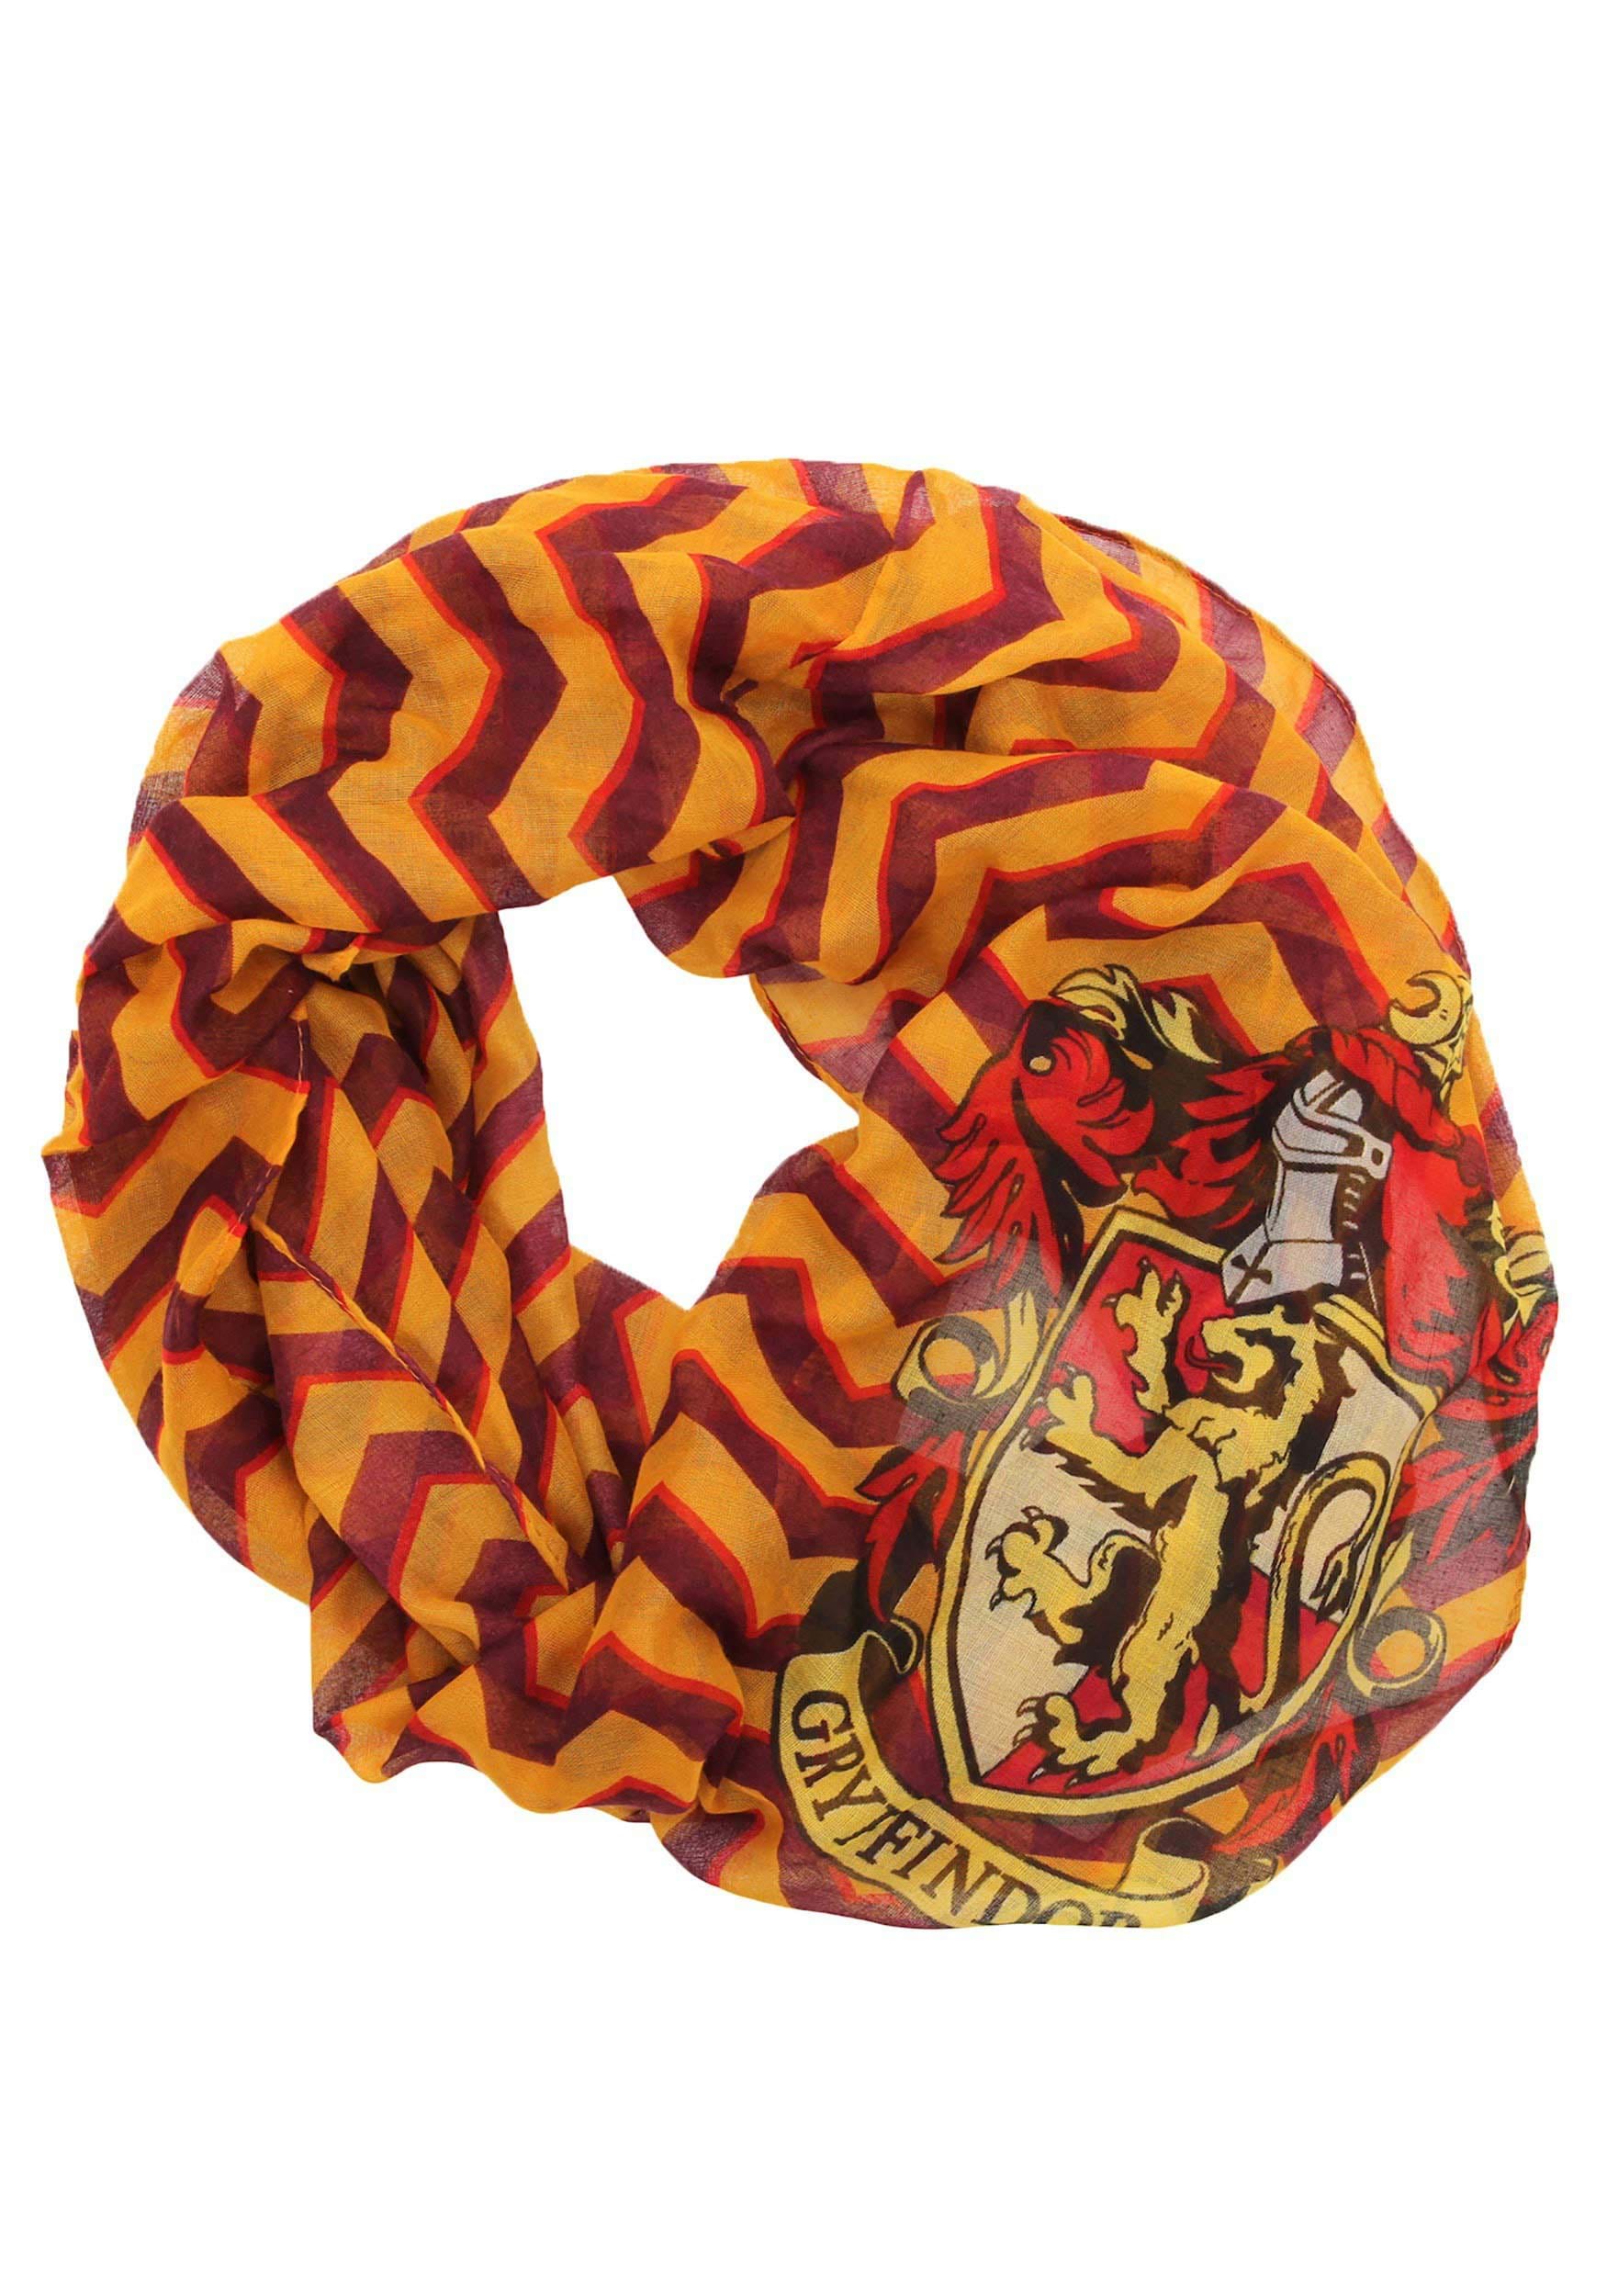 Gryffindor Infinity Scarf from Harry Potter